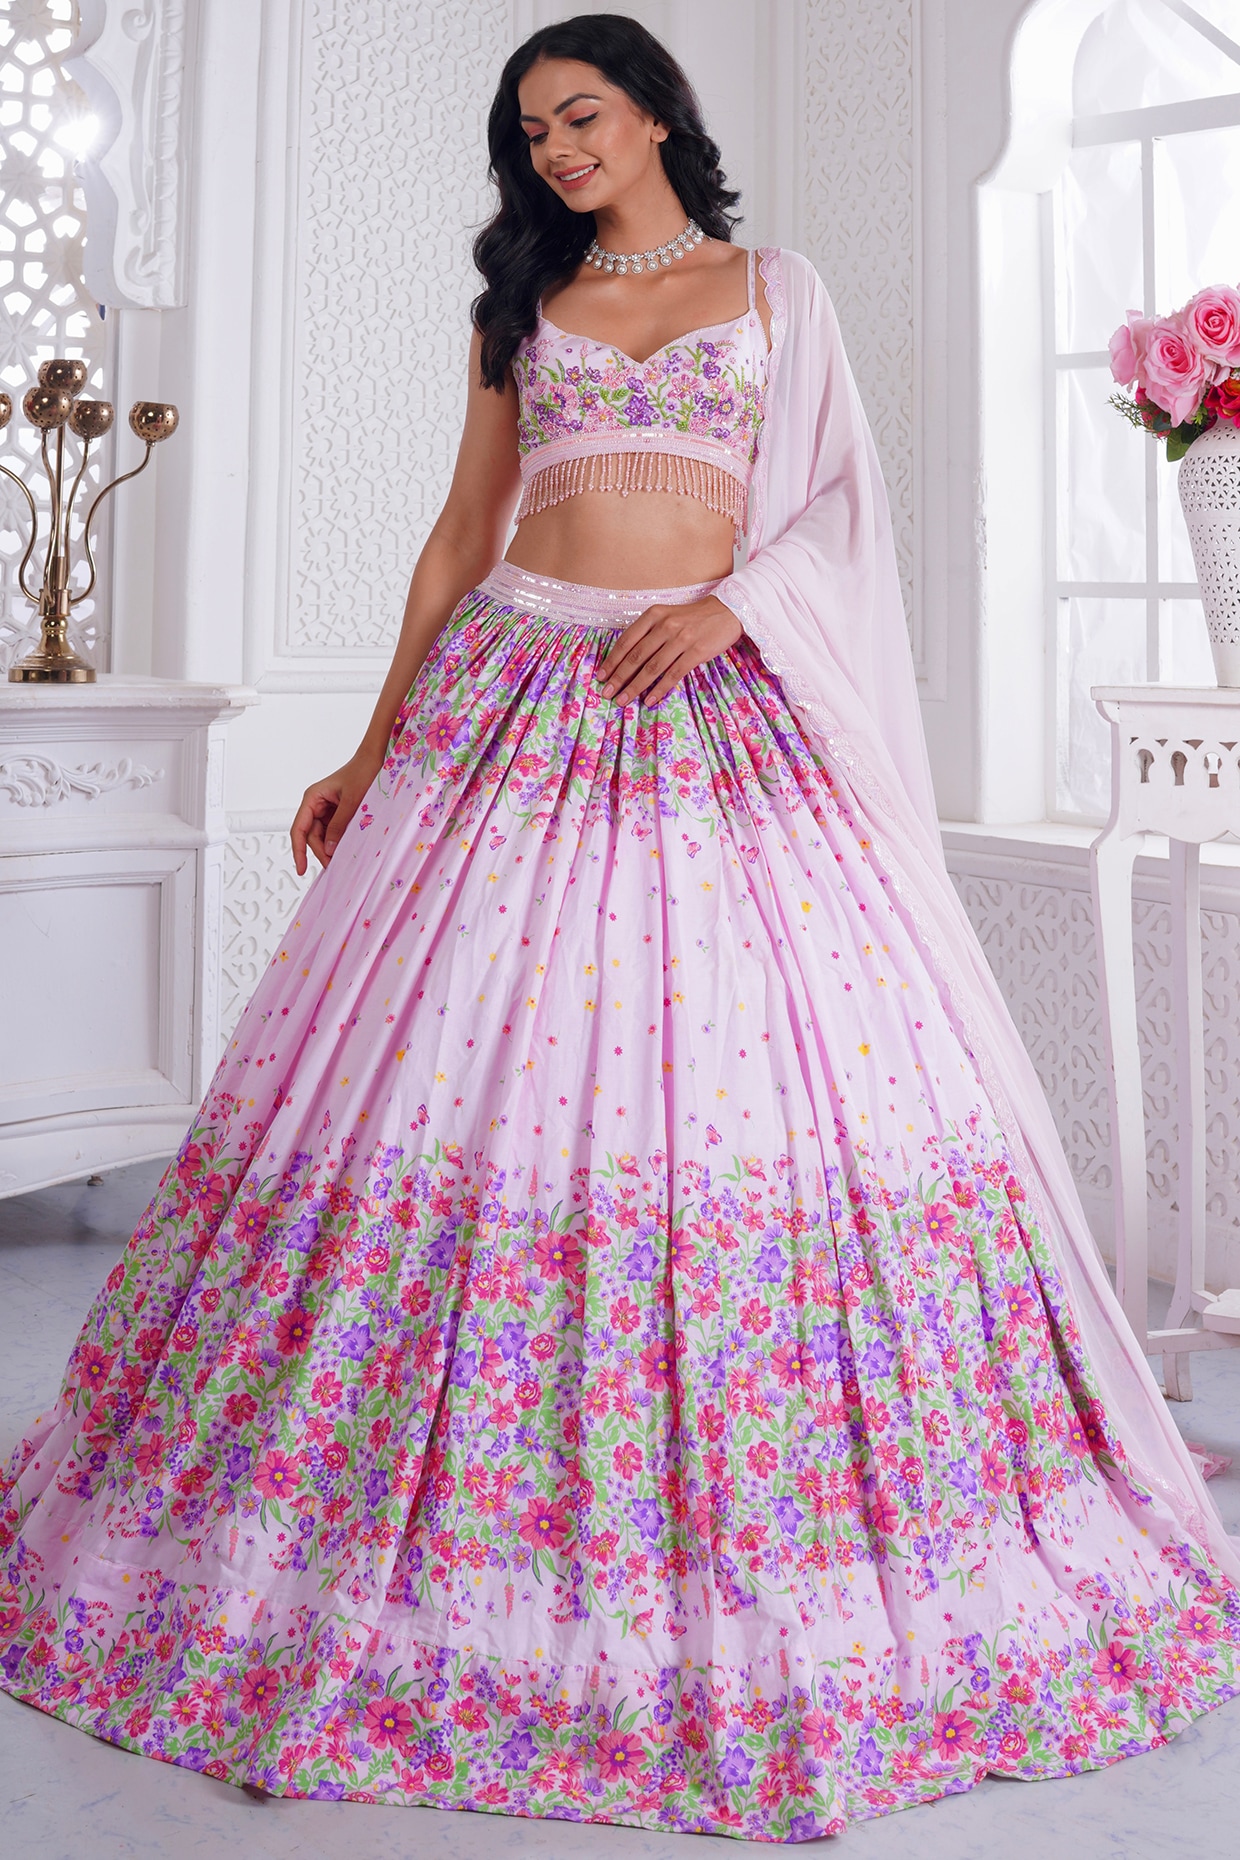 Buy Multi-Colored Lehenga In Jaipuri Folk Art Print. Paired With The Choli  And Dupatta In Gotta Patti And Beaded Embroidery